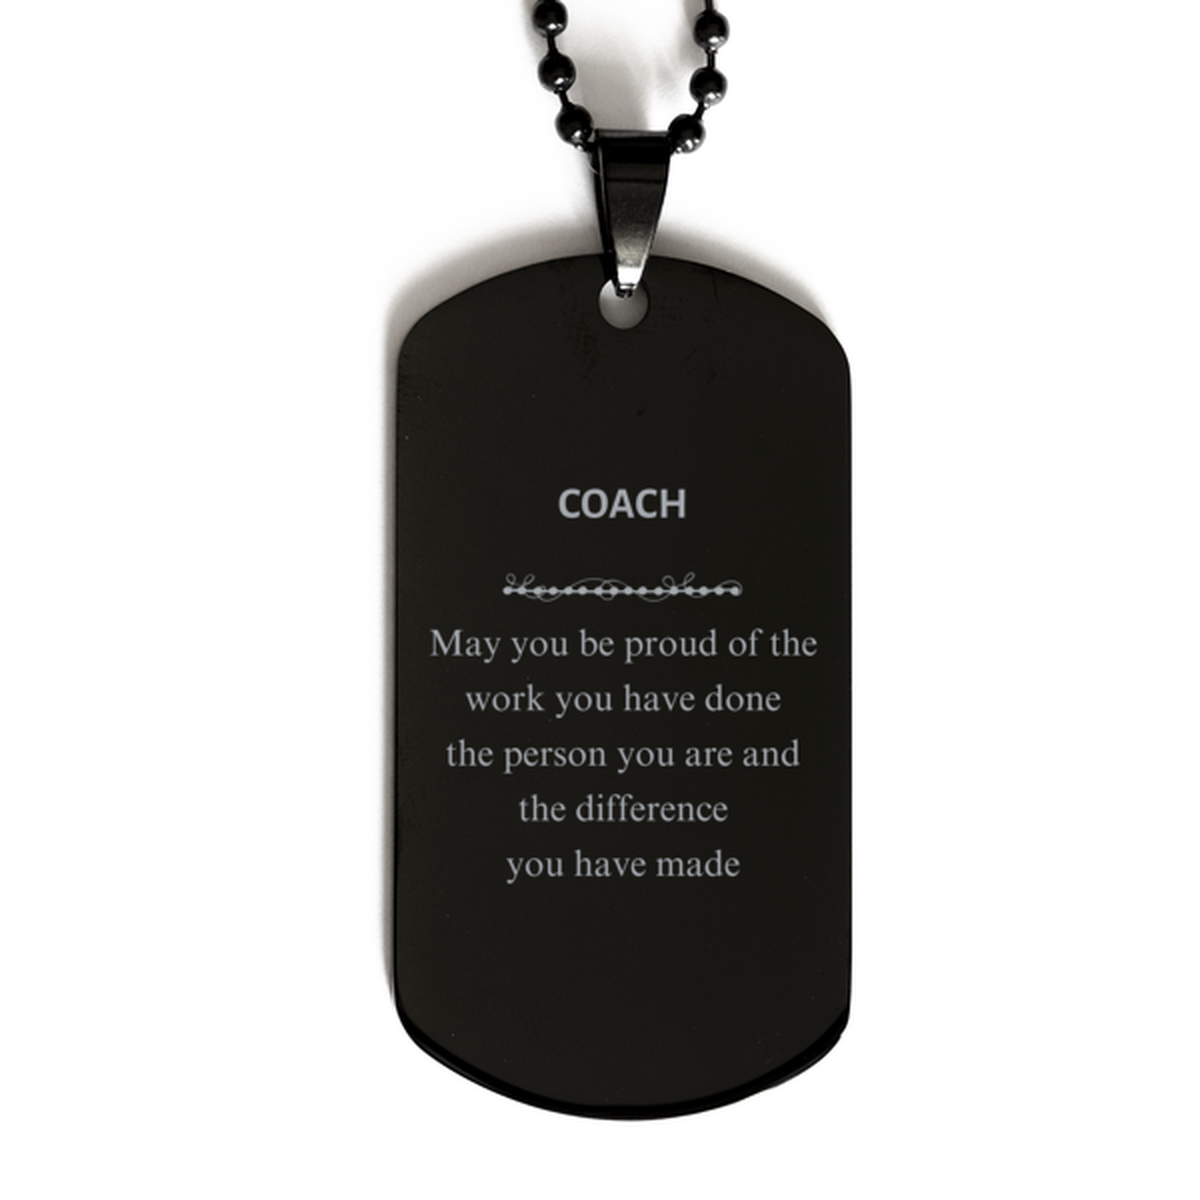 Coach May you be proud of the work you have done, Retirement Coach Black Dog Tag for Colleague Appreciation Gifts Amazing for Coach